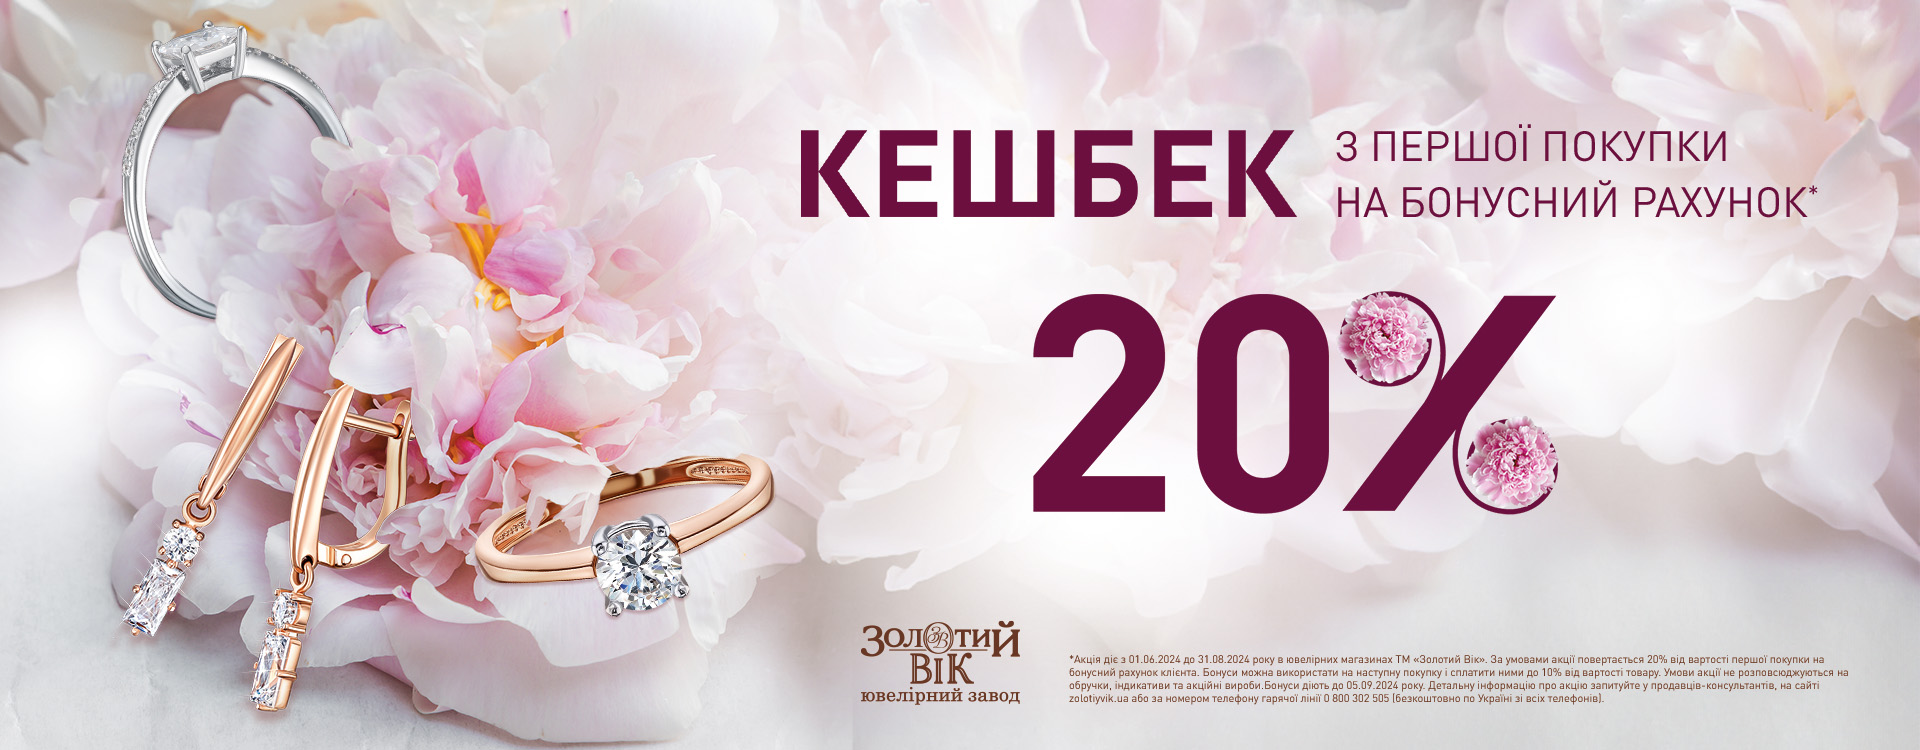 Buy jewelry and get cashback